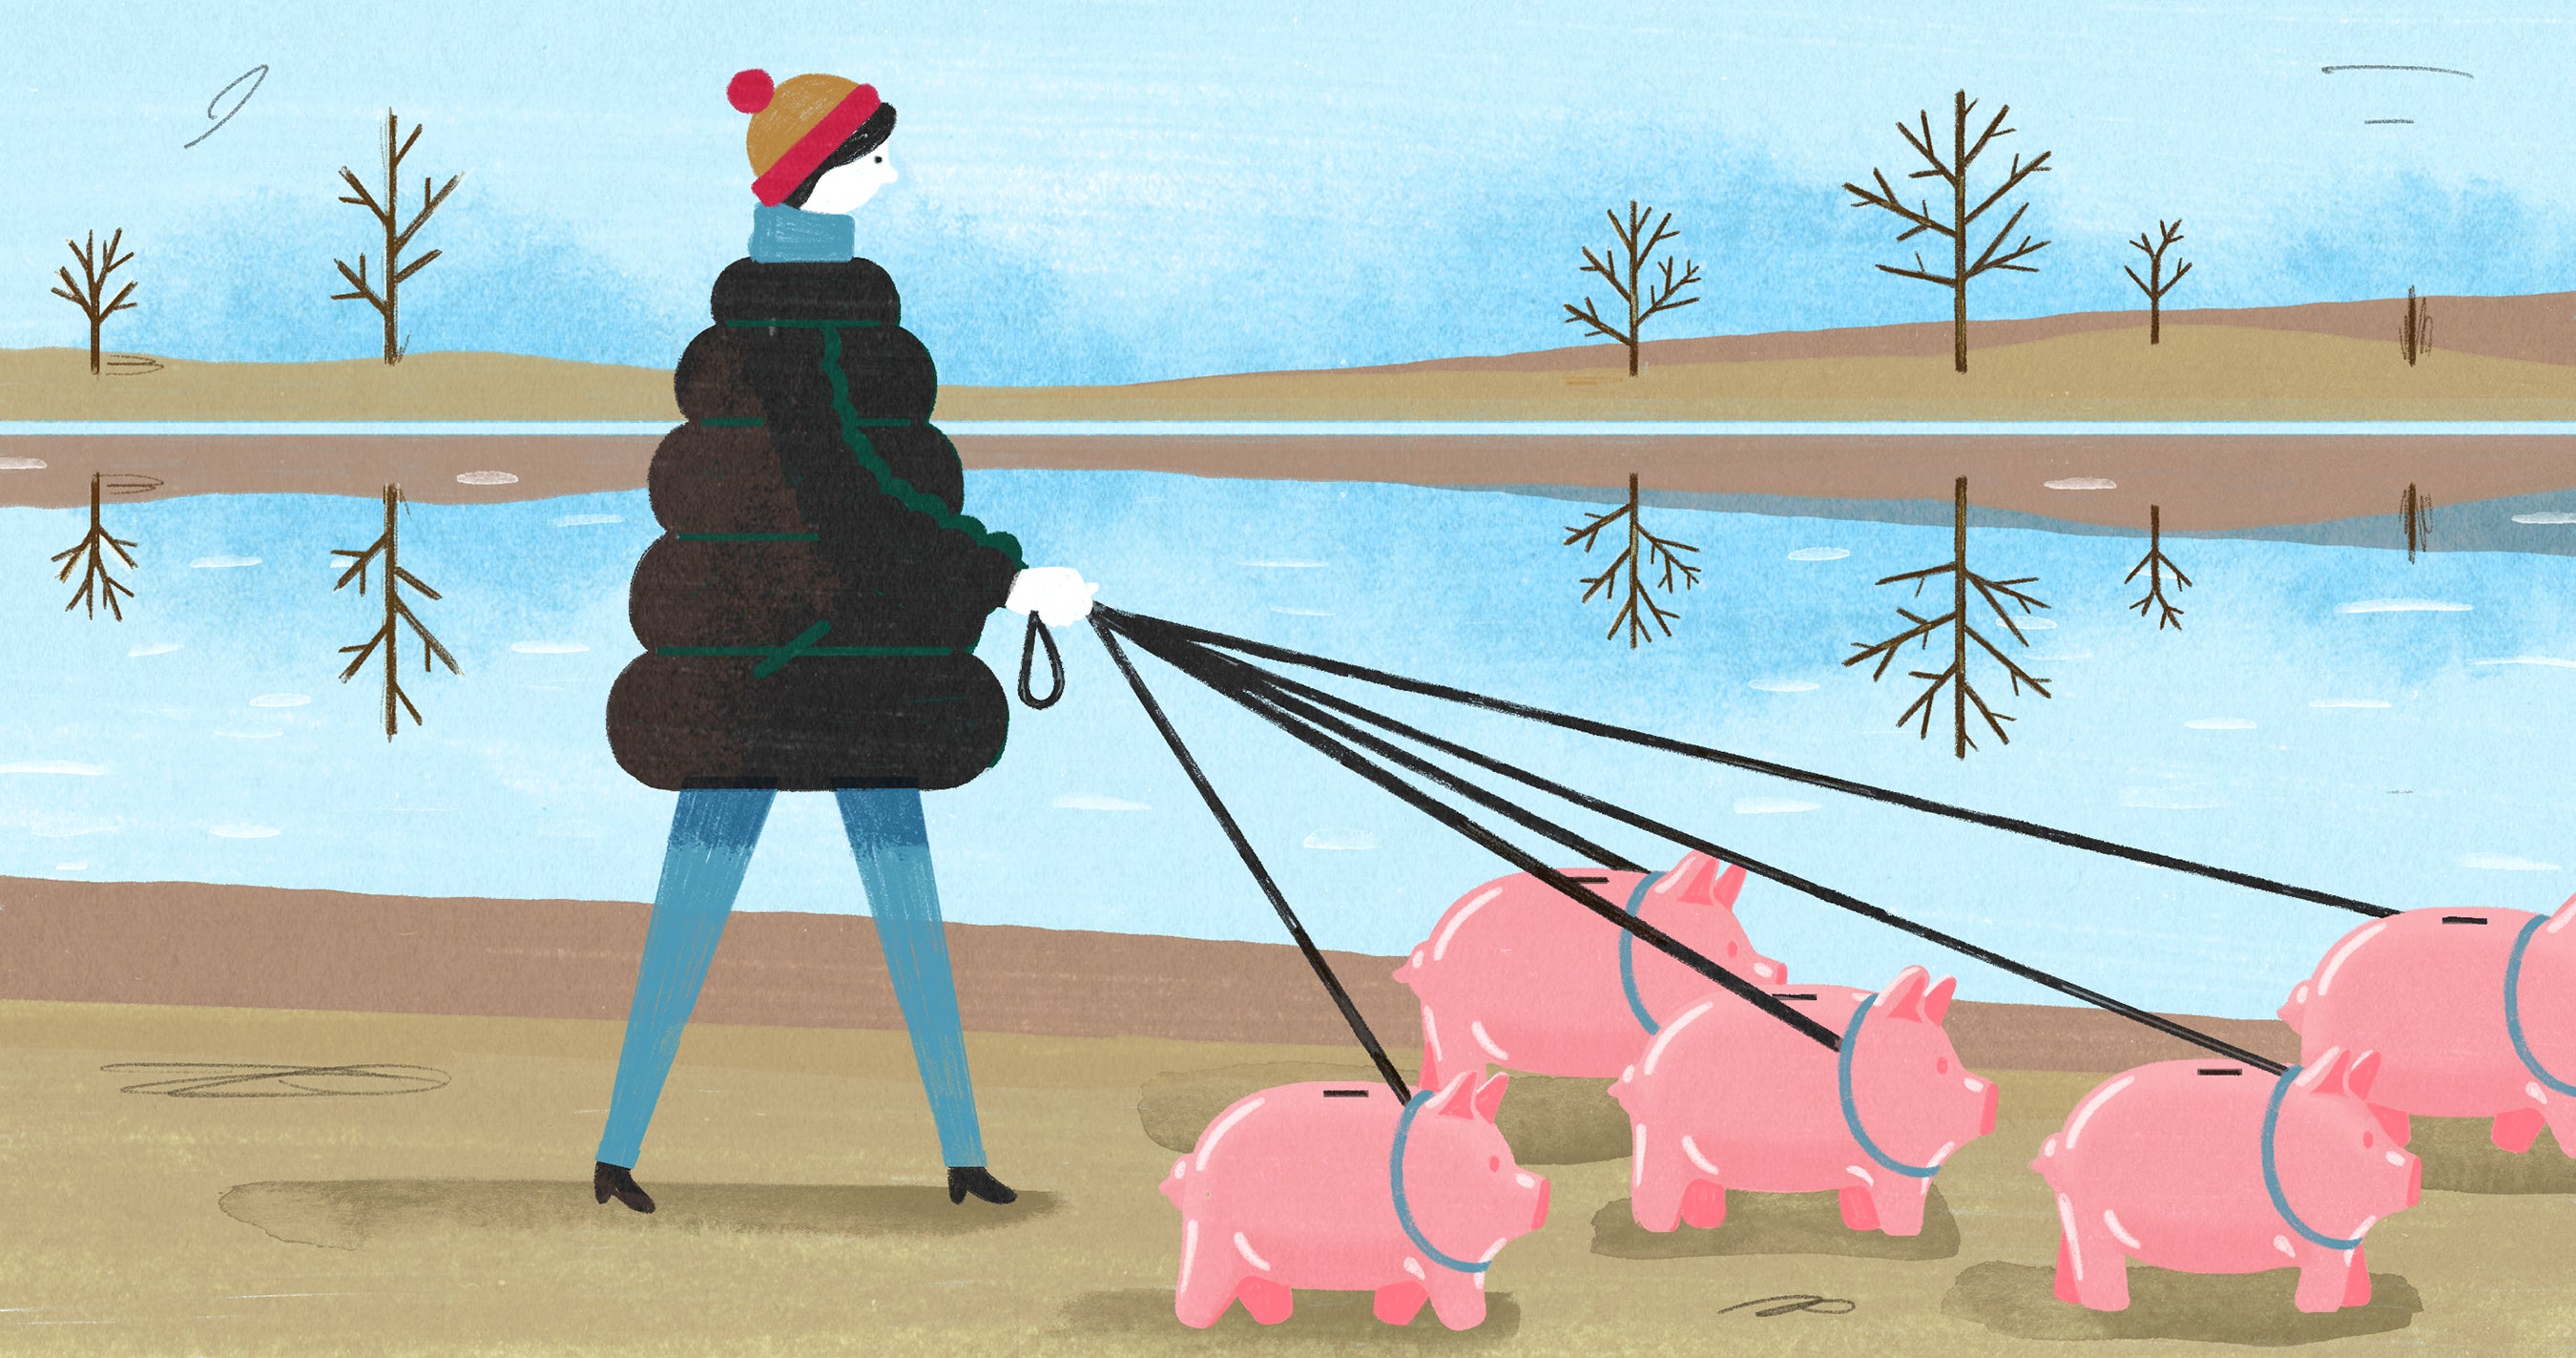 A person walks a group of piggy banks on leashes, illustrating the concept of running a pet business.